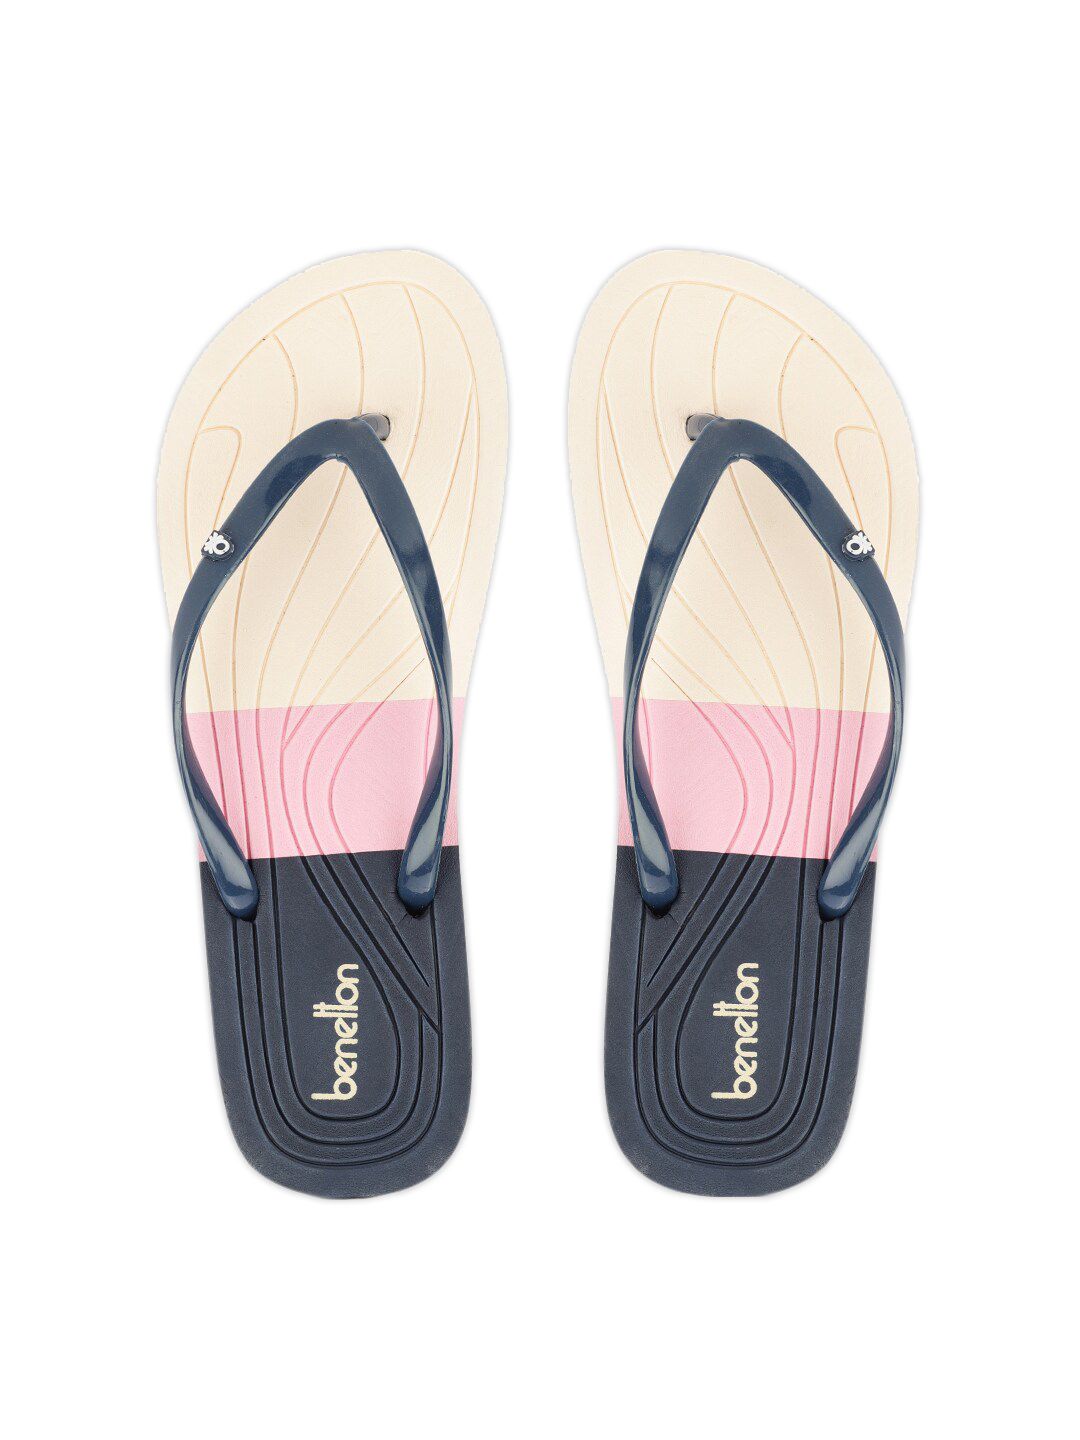 United Colors of Benetton Women Navy Blue & Pink Colourblocked Rubber Thong Flip-Flops Price in India